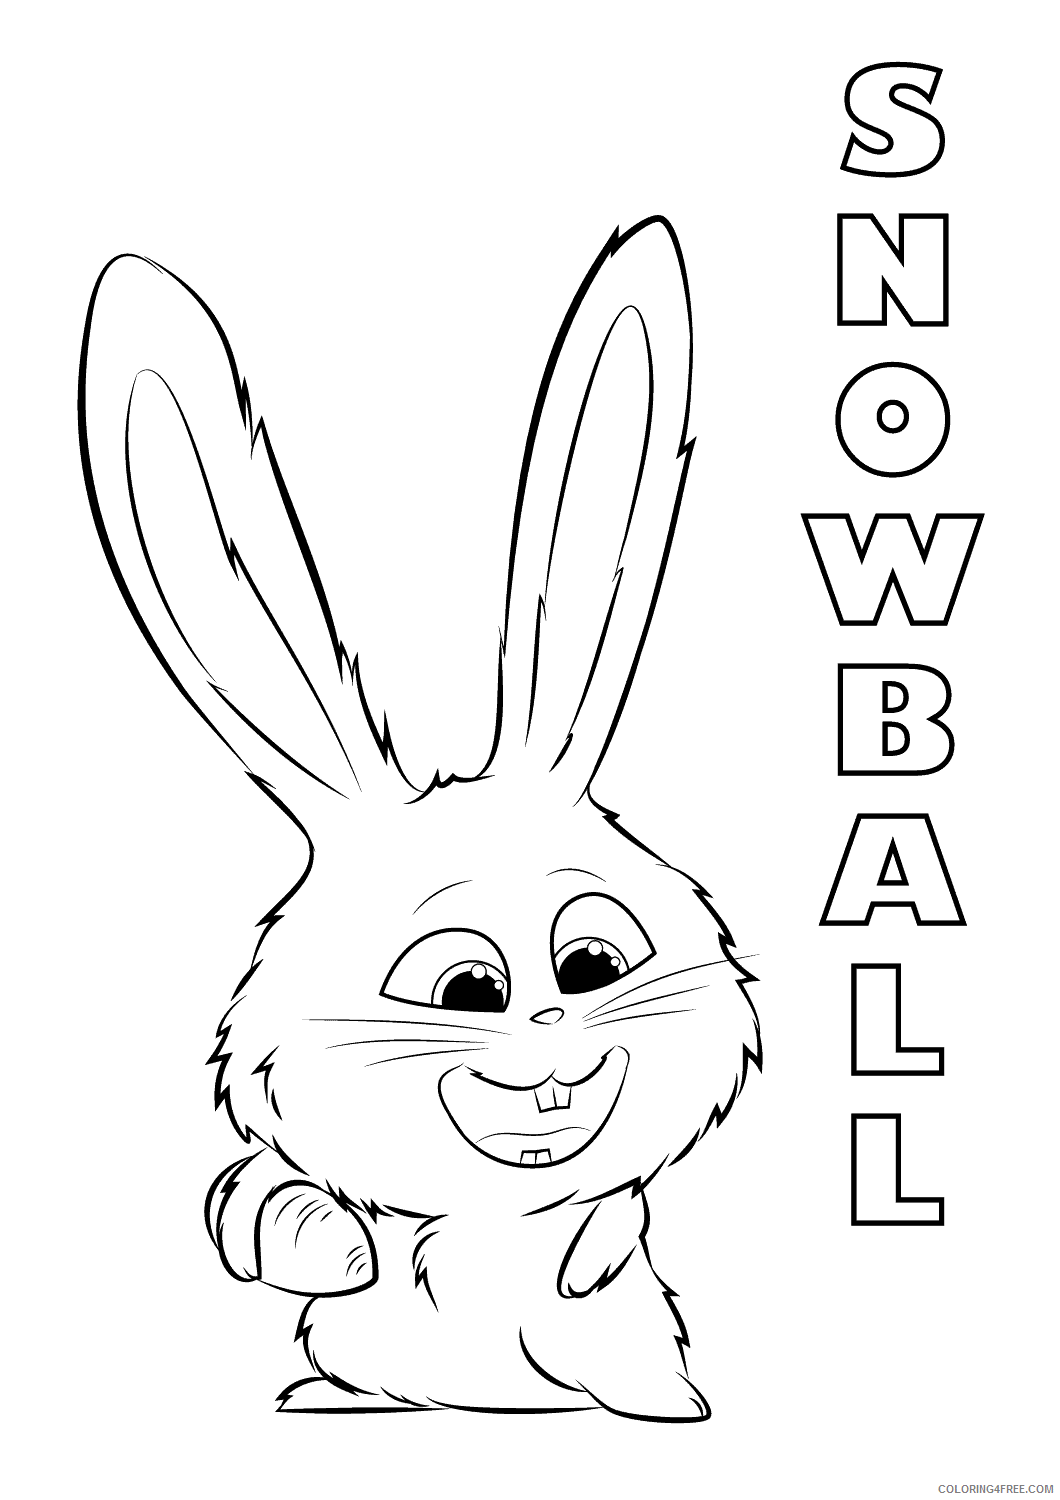 The Secret Life of Pets Coloring Pages TV Film Snowbal Printable 2020 09507 Coloring4free